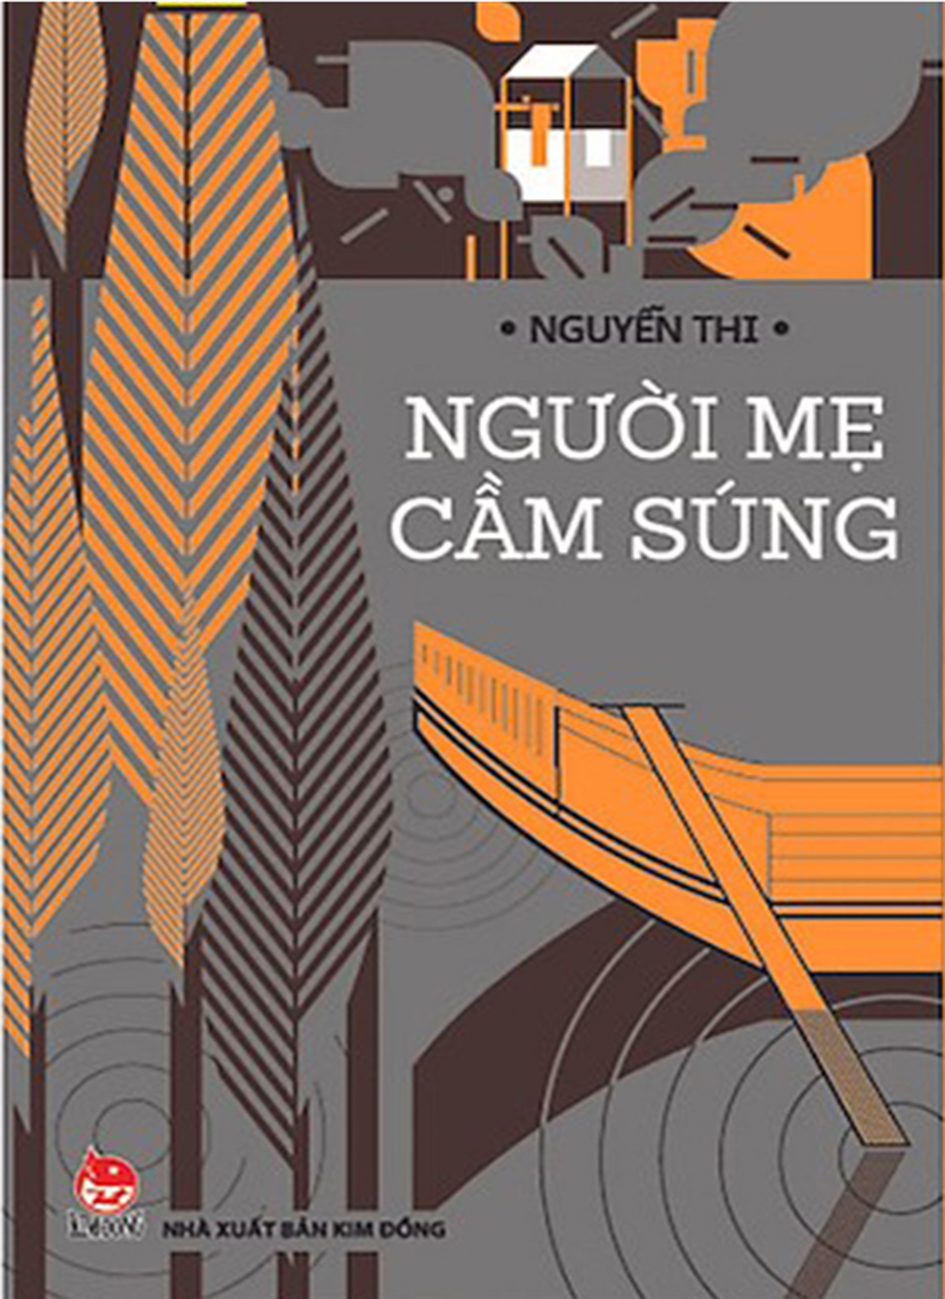 nguoi me cam sung